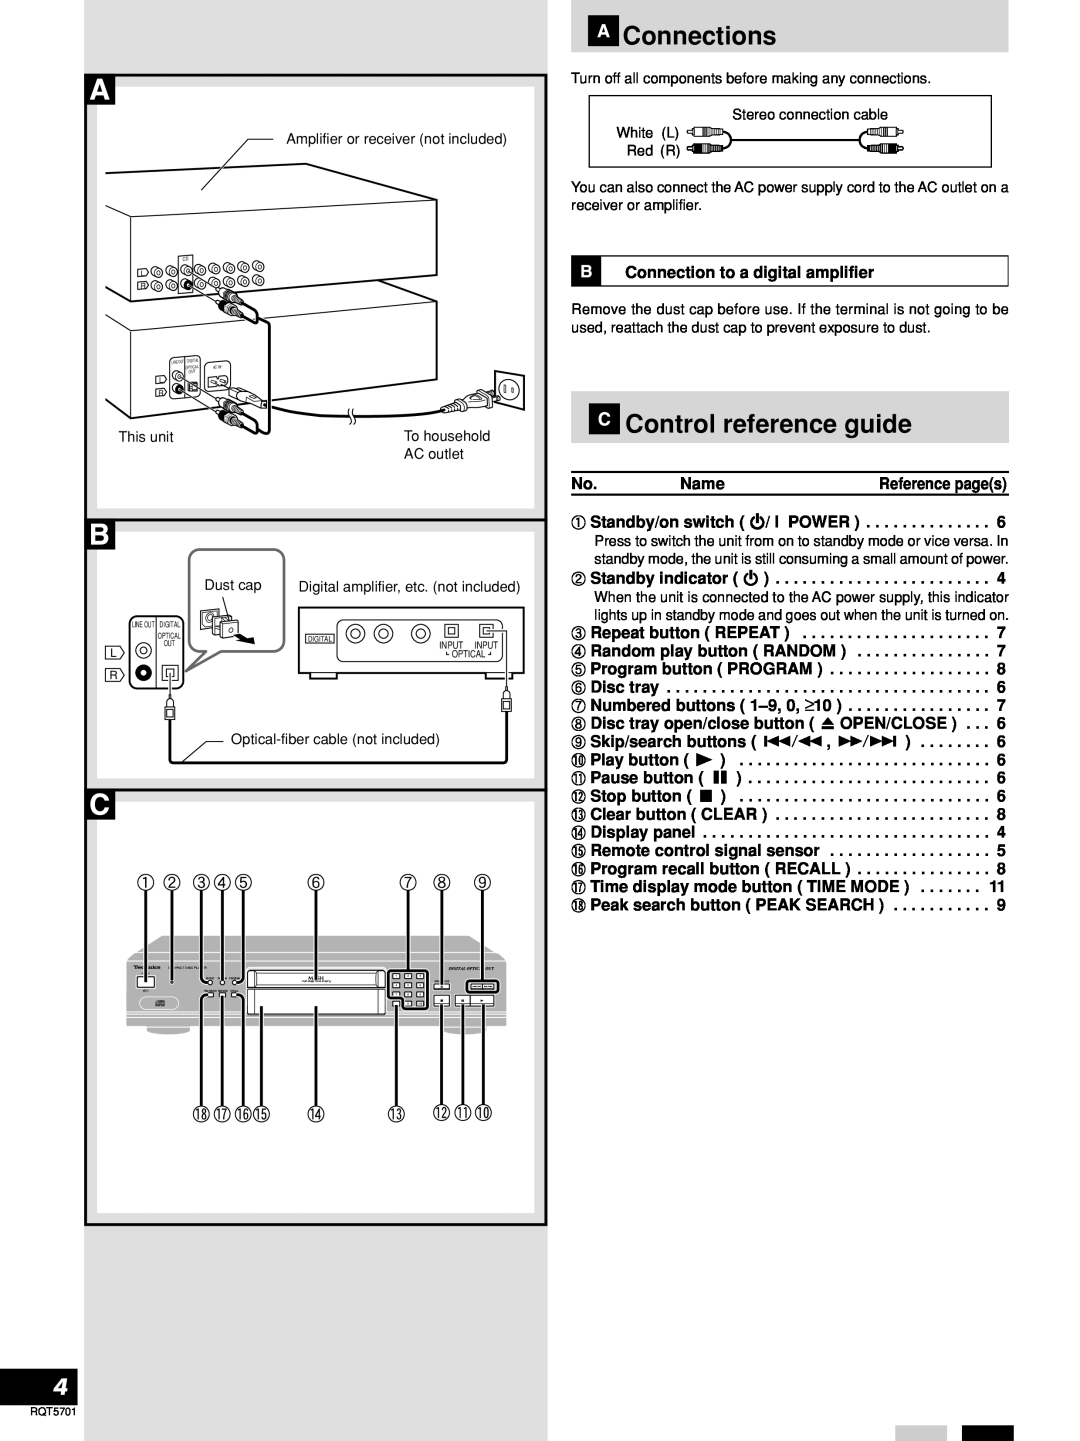 Panasonic SL-PG4 manual Connections, Control reference guide 